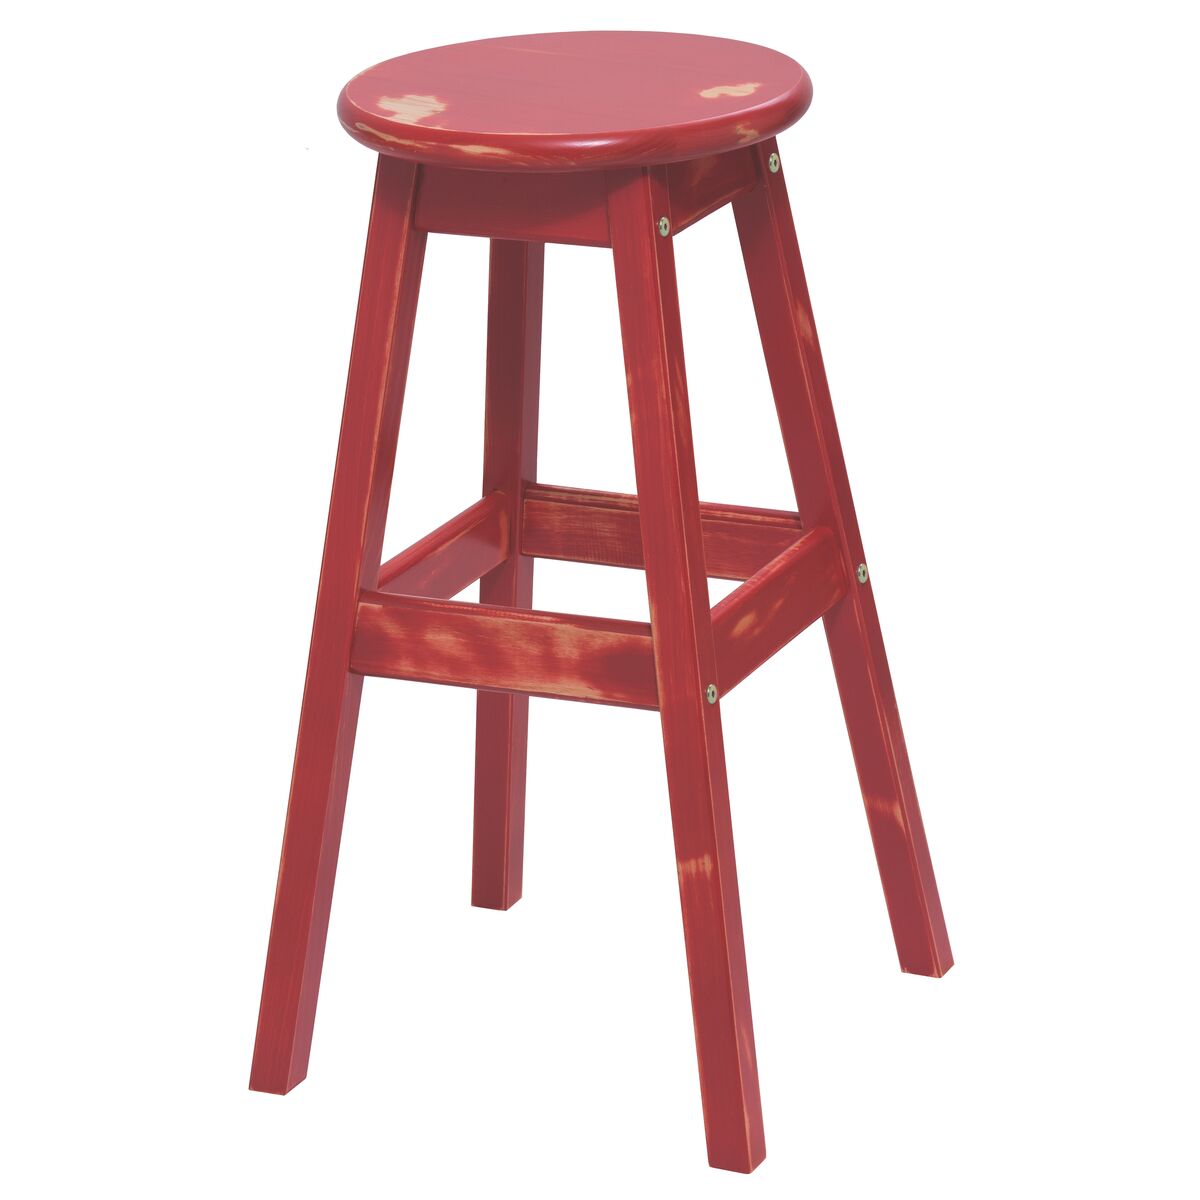 Tramontina Red Wood Counter Stool with Rustic Finish
